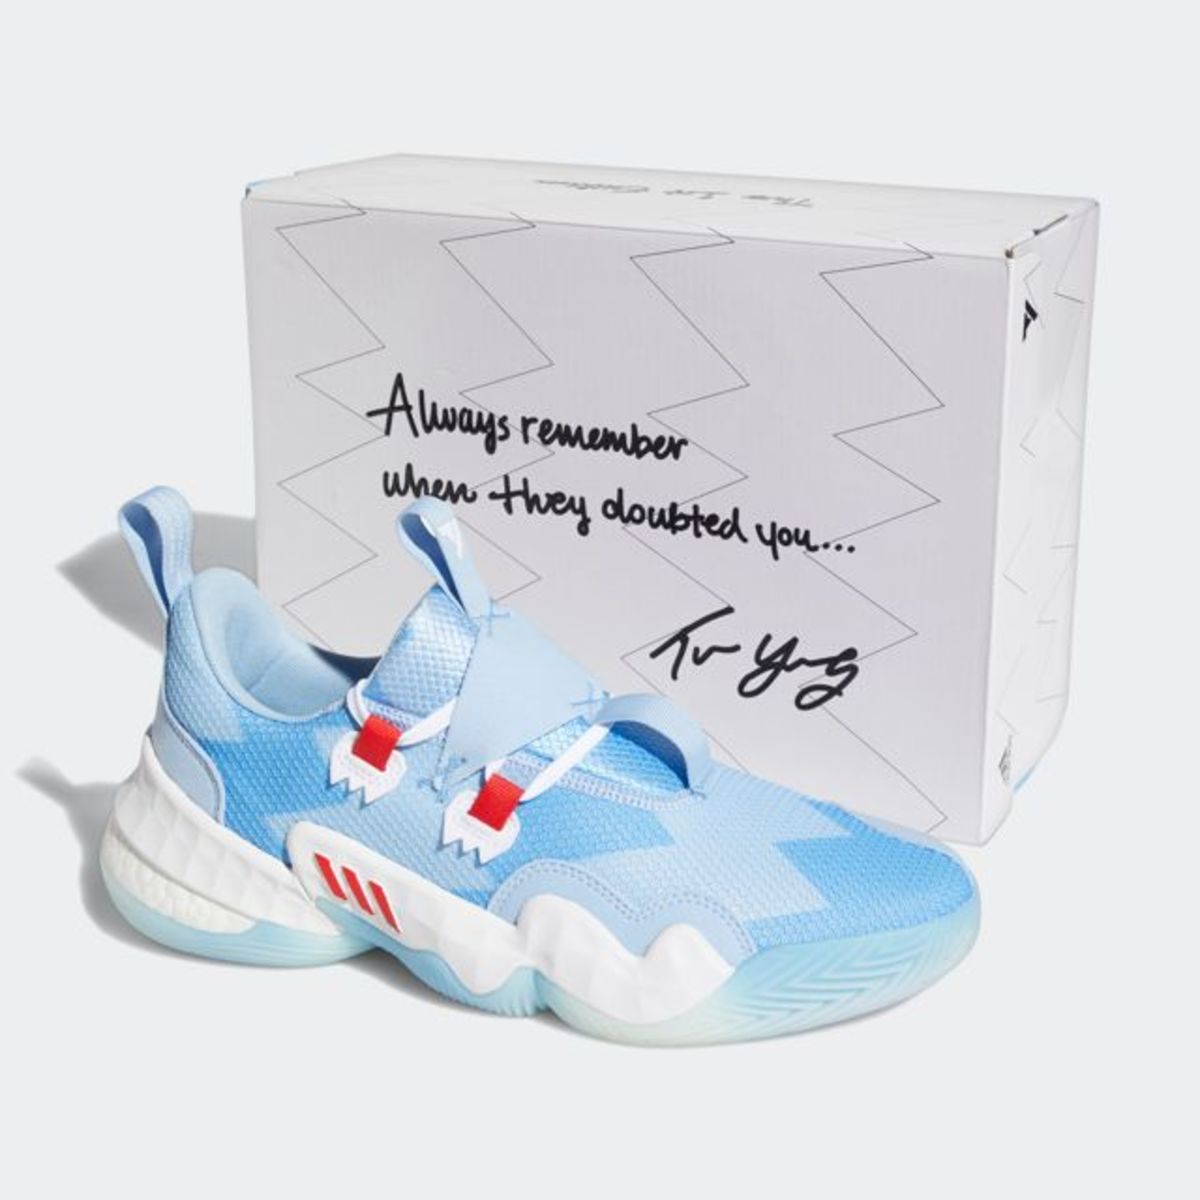 Image of the ICEE colorway of the Adidas Trae Young 1